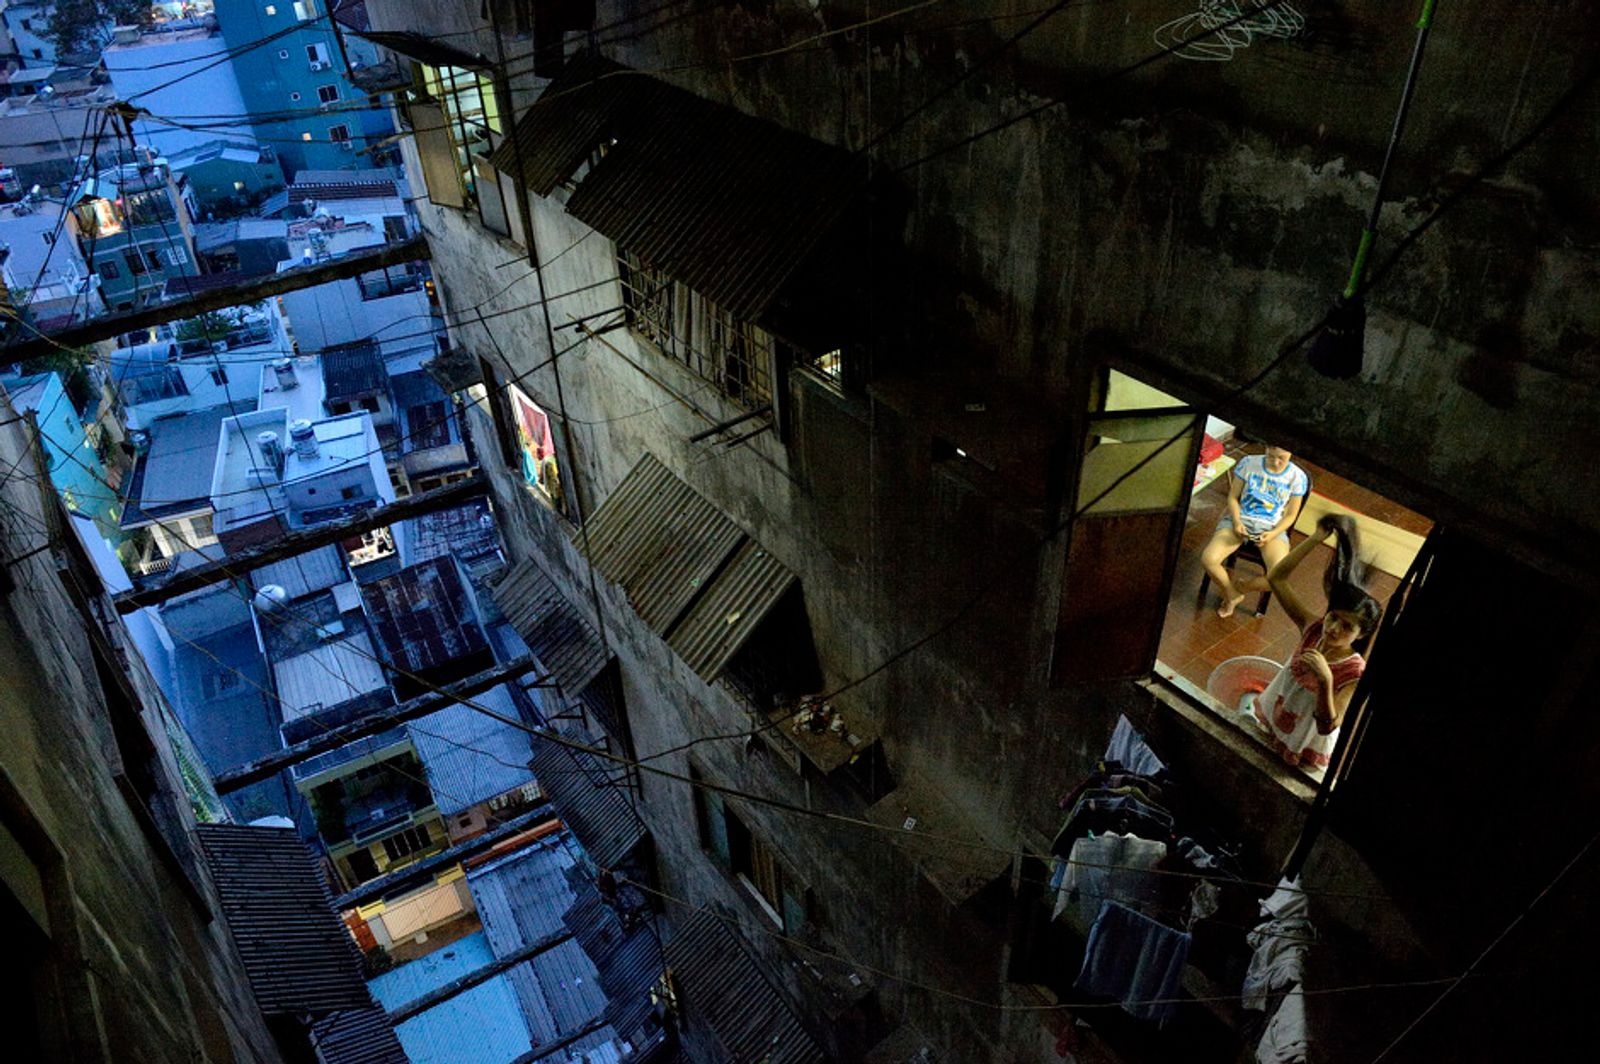 © Laurent Weyl - Image from the President Hotel - Ho Chi Minh City - Vietnam photography project